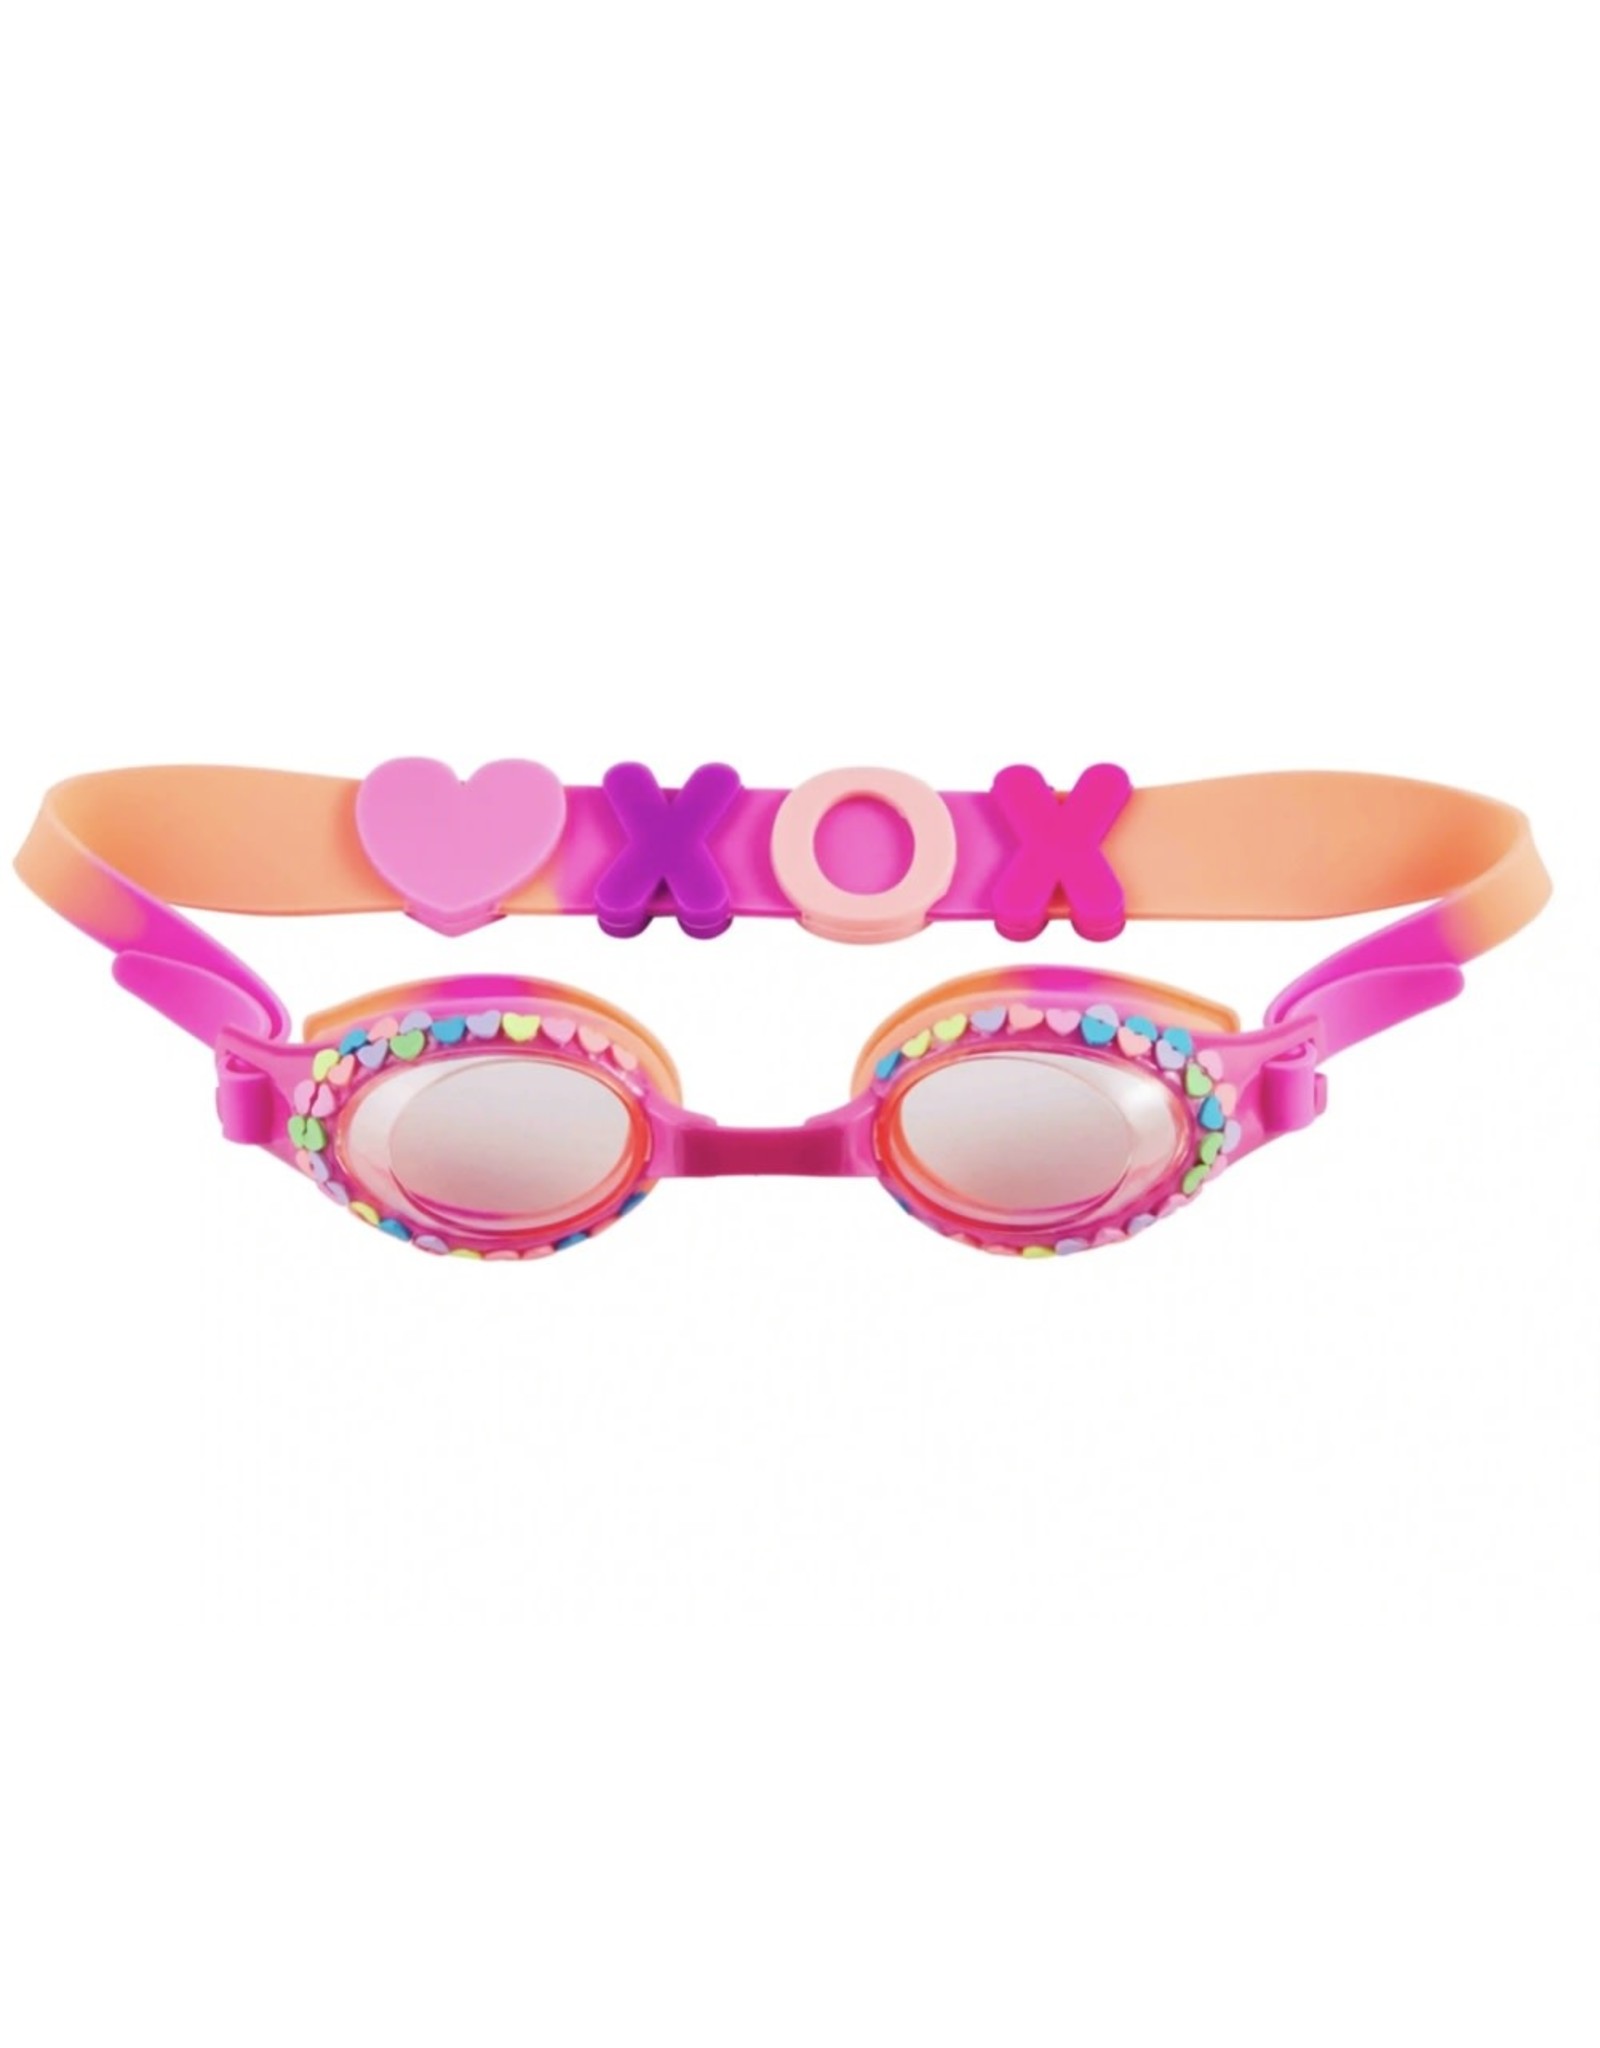 Mudpie Mud Pie- Candy Heart Girl Goggles